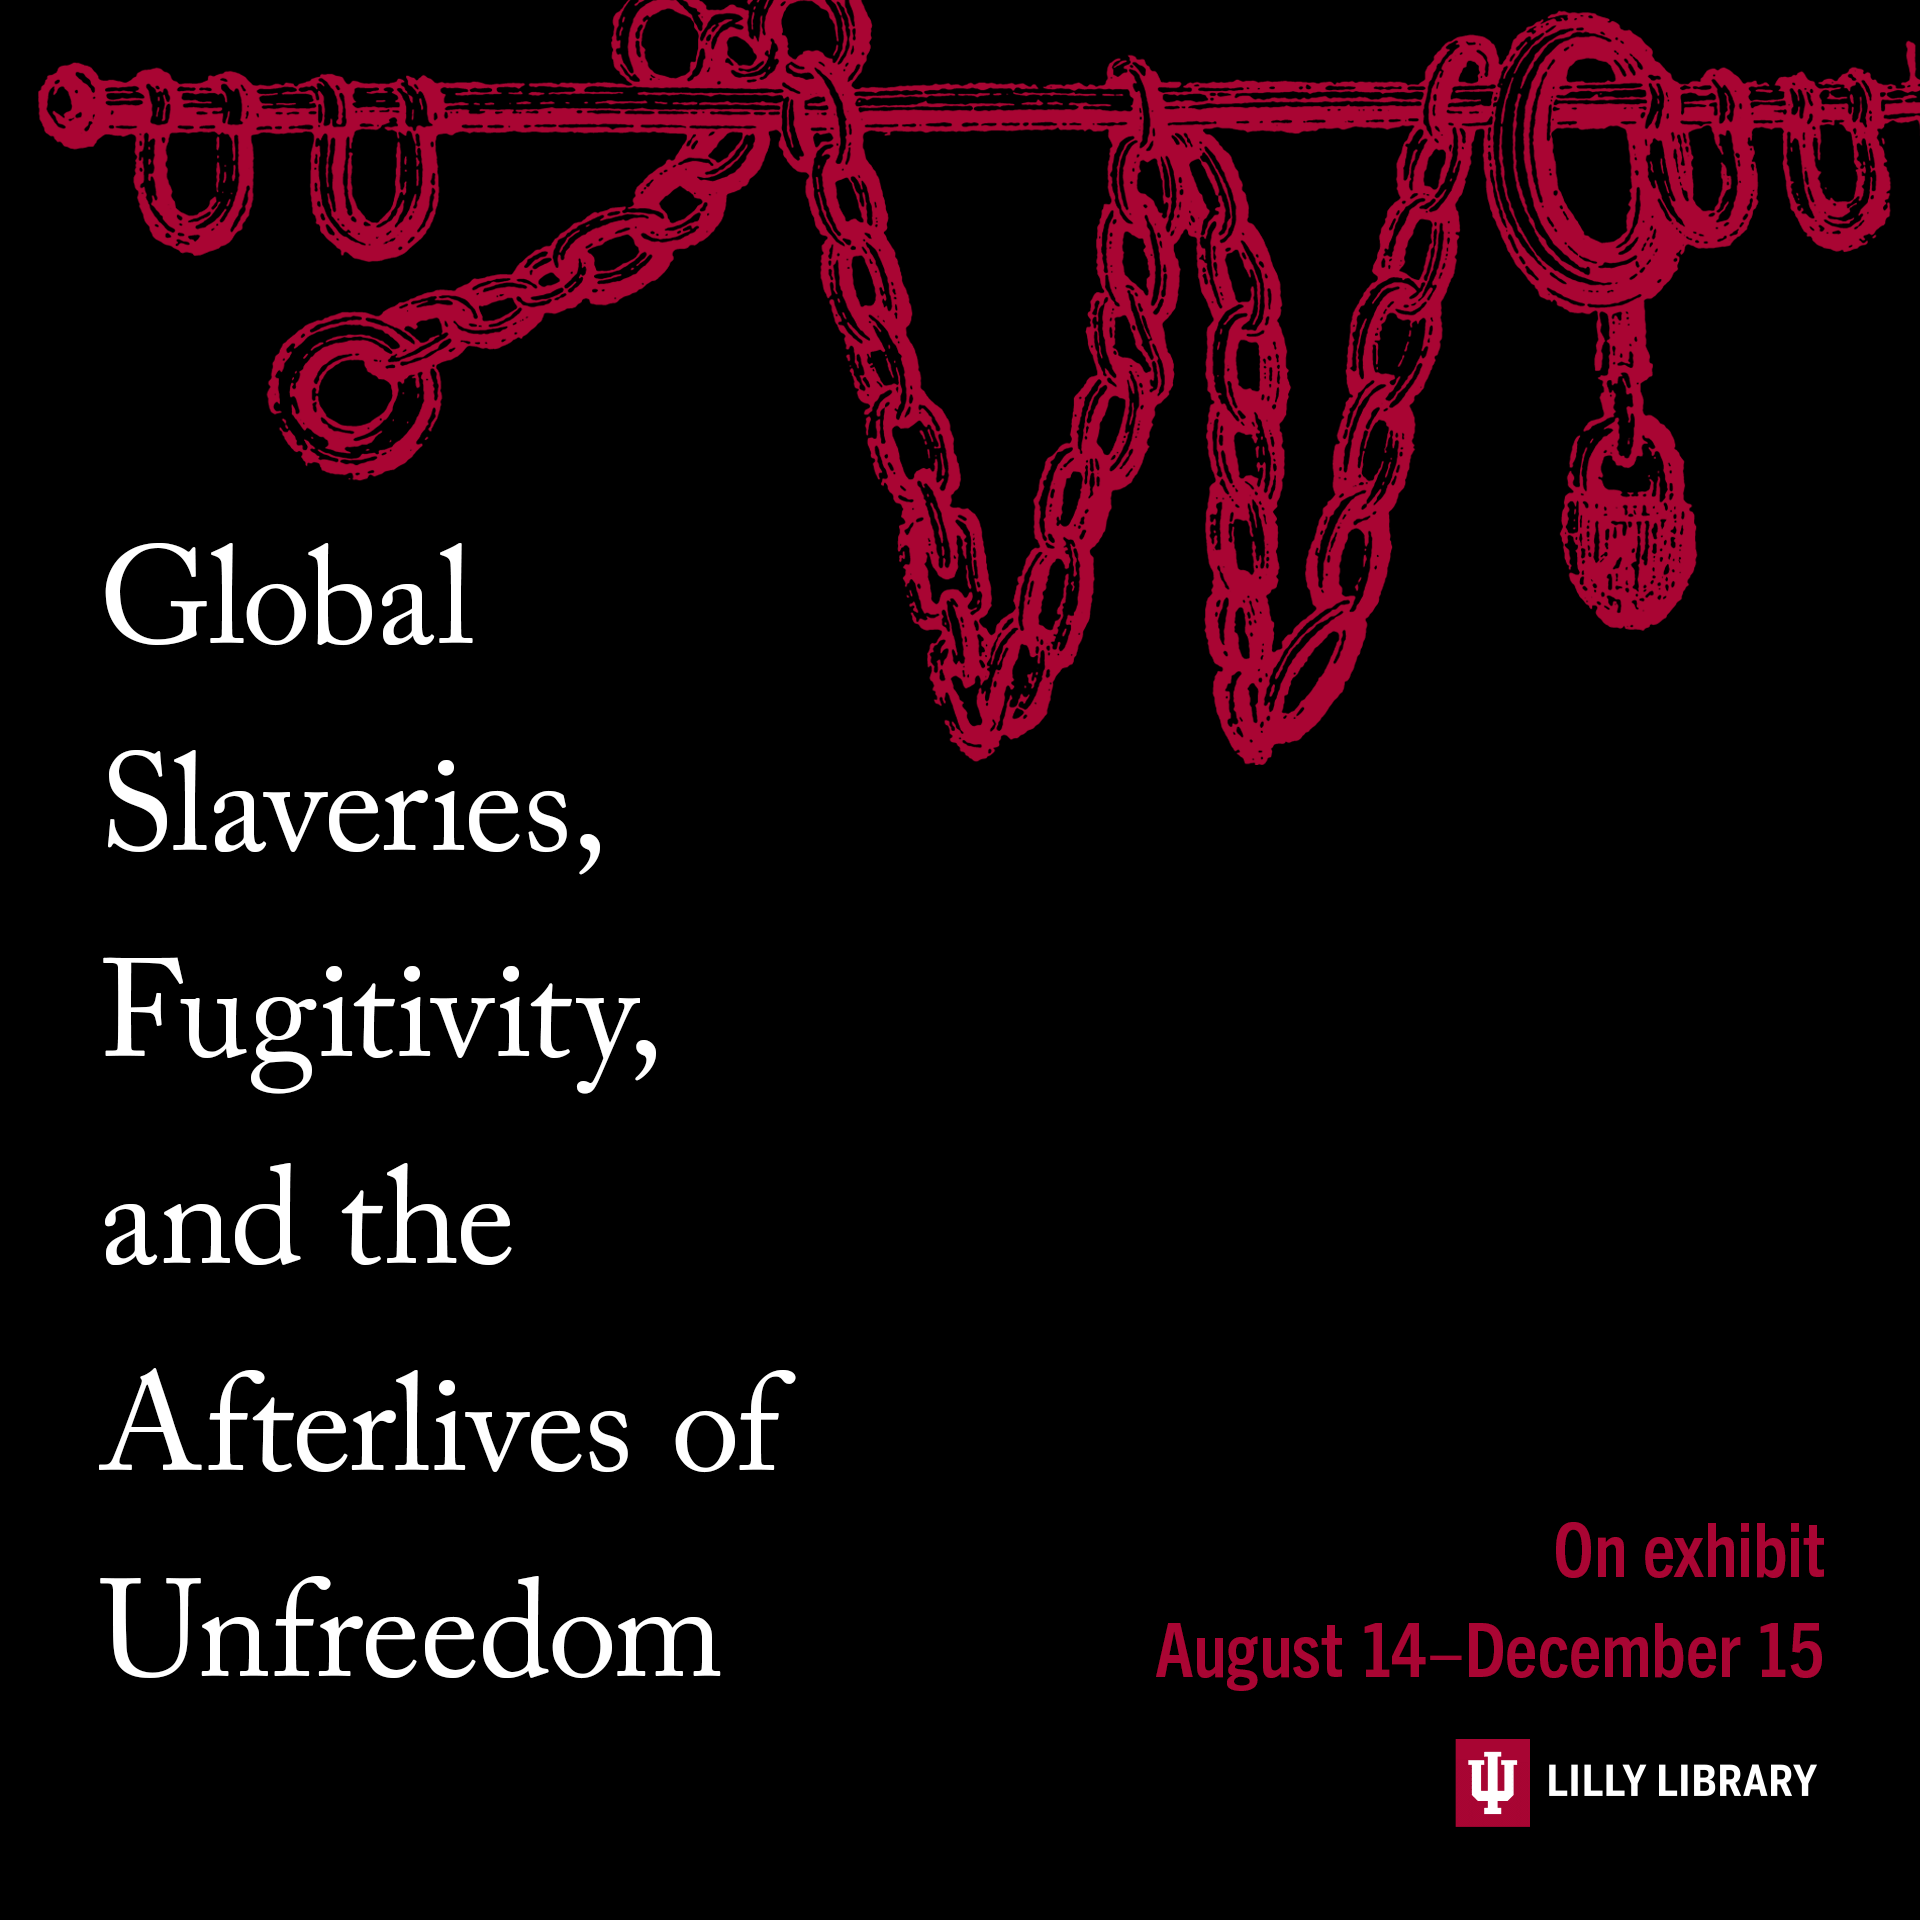 Global Slaveries, Fugitivity, and the Afterlives of Unfreedom. On exhibit August 14-December 15